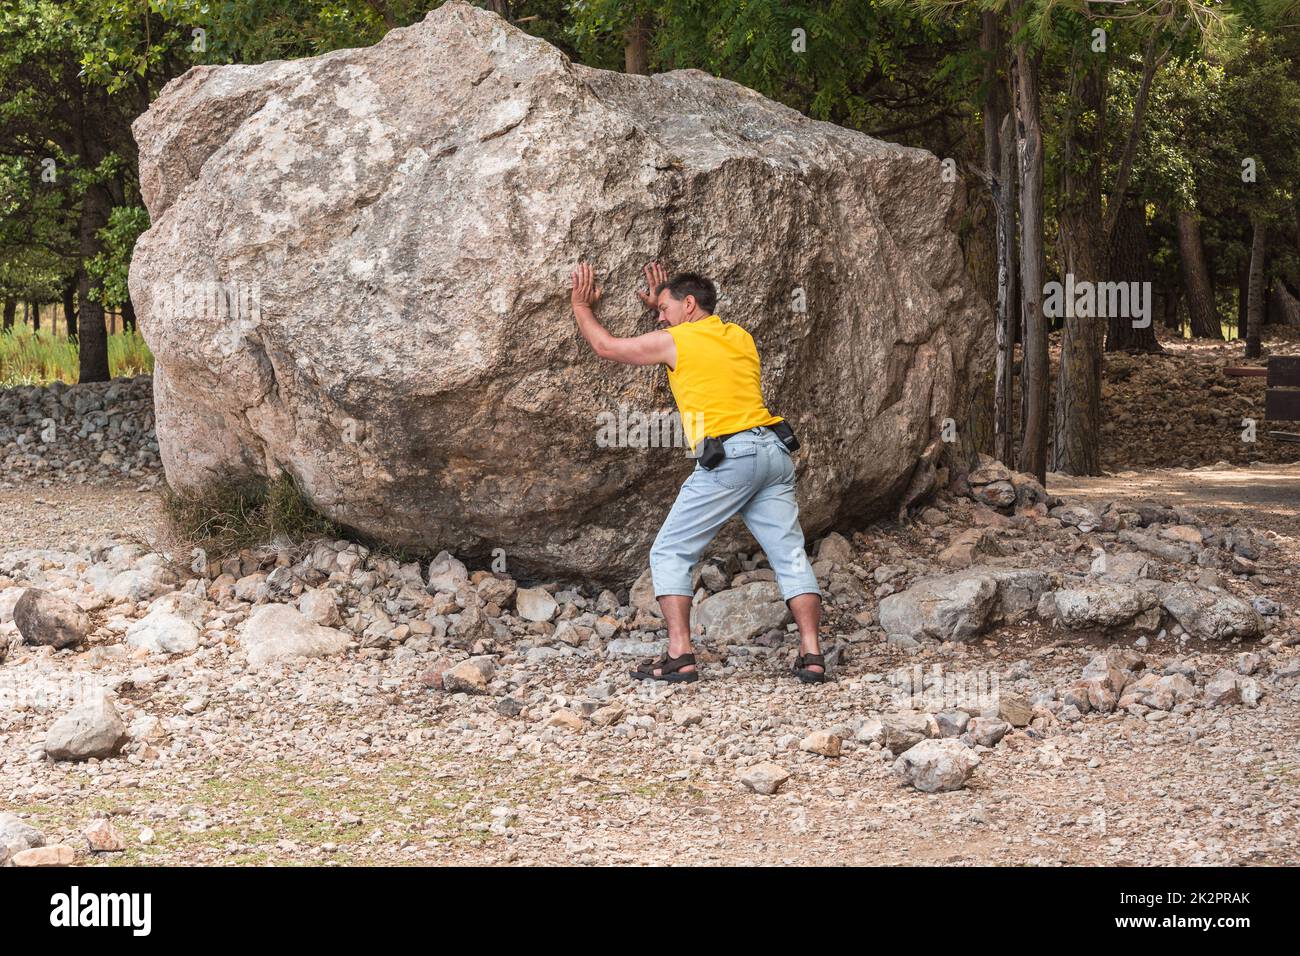 Man stands in front of a large rock. erratic boulder which was built by erosion. Stock Photo